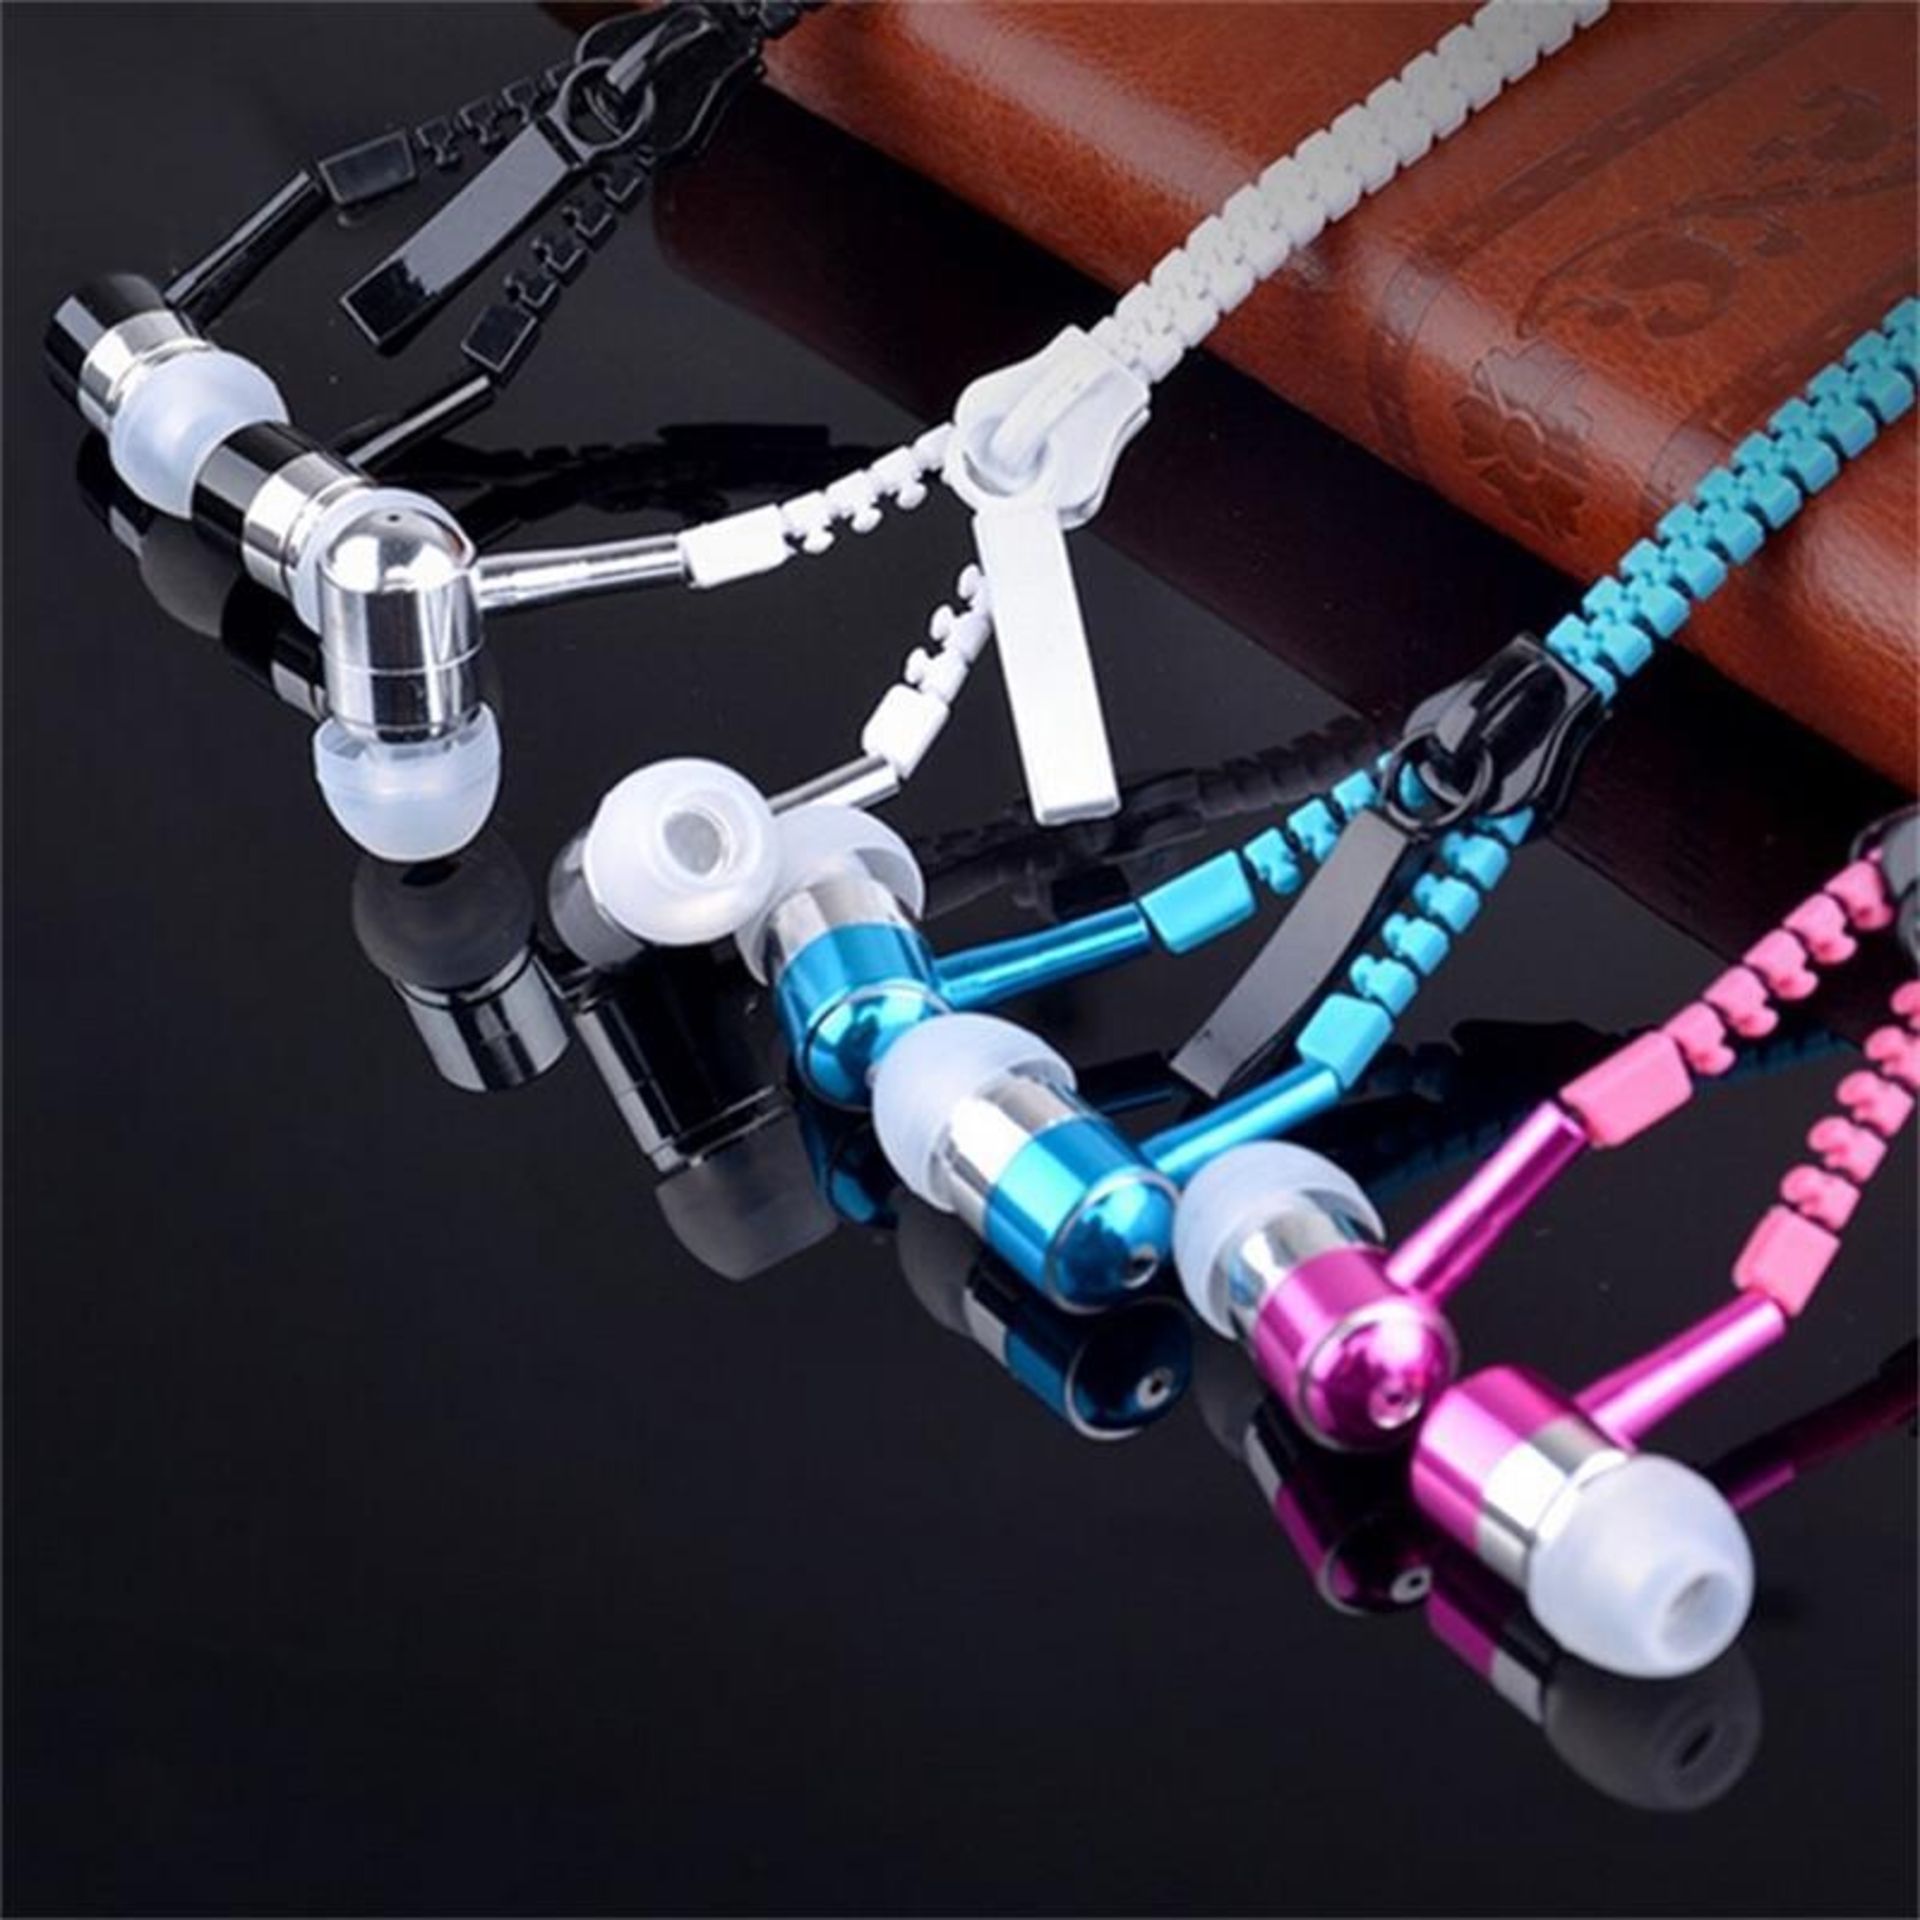 Brand New Zip Up Earphones With Non Tangle Wire - 3.5mm Universal Jack - Microphone For Handsfree -